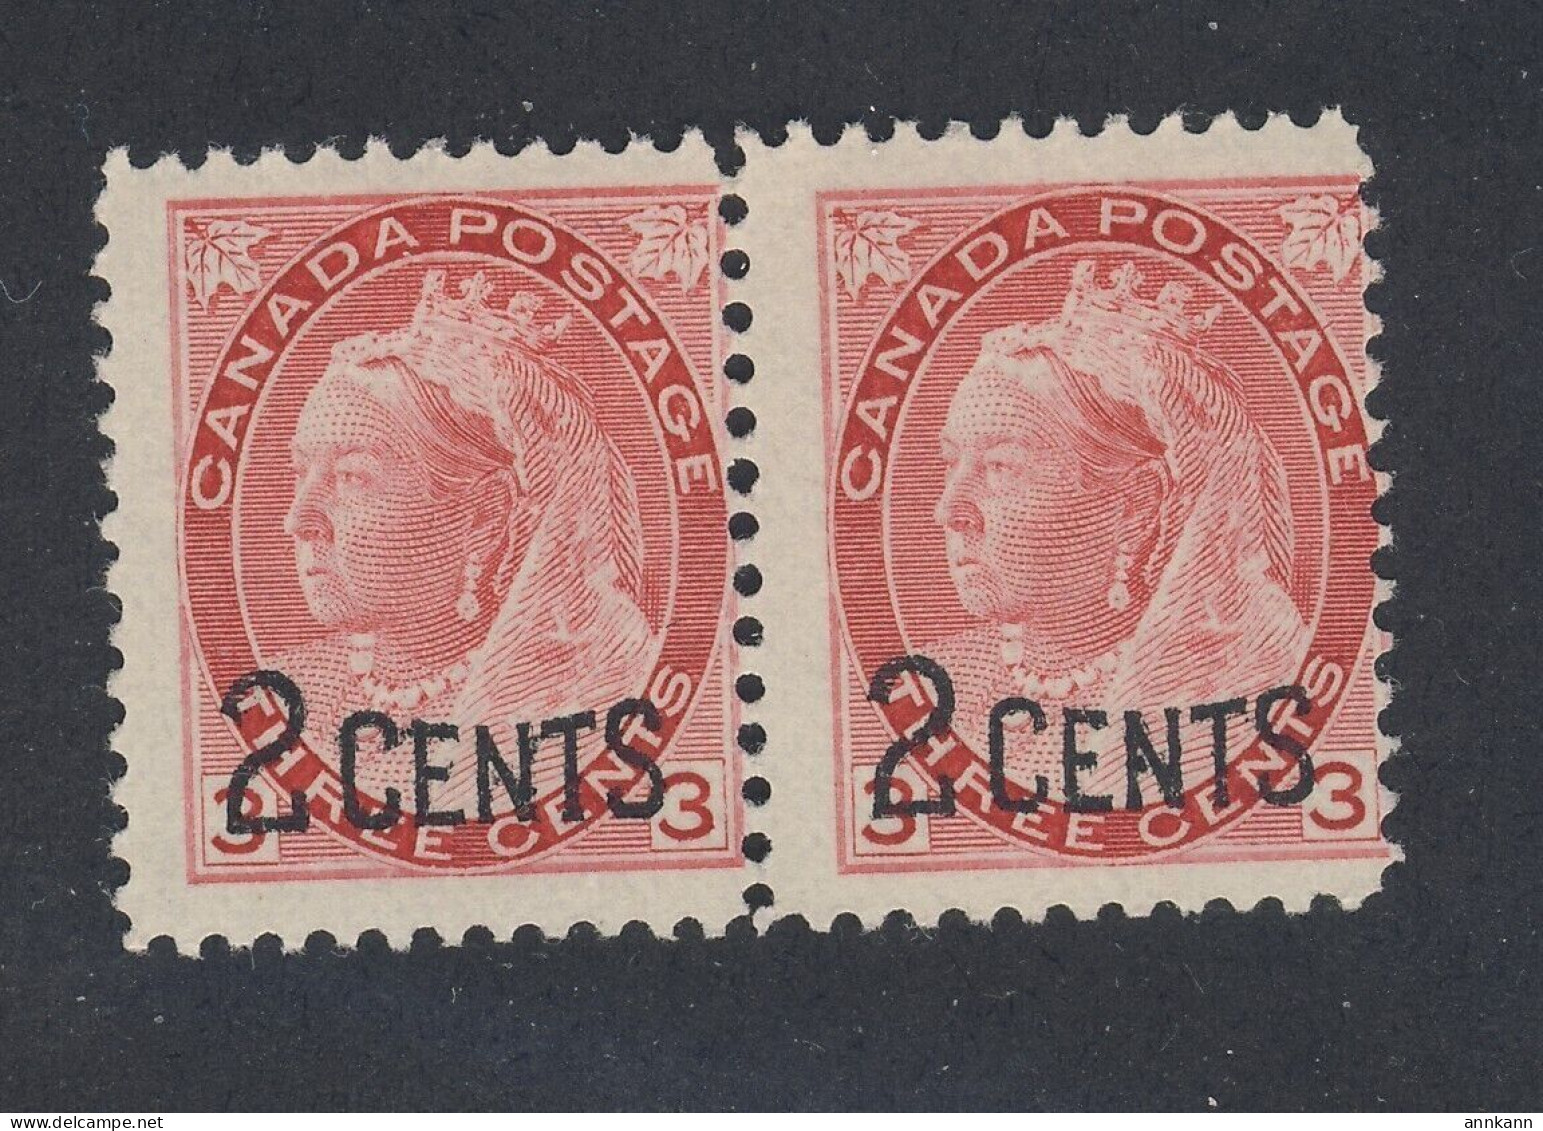 2x Canada Victoria Numeral OP Stamps; Pair #88 - 2c/3c MNH F Guide Value=$60.00 - Unused Stamps